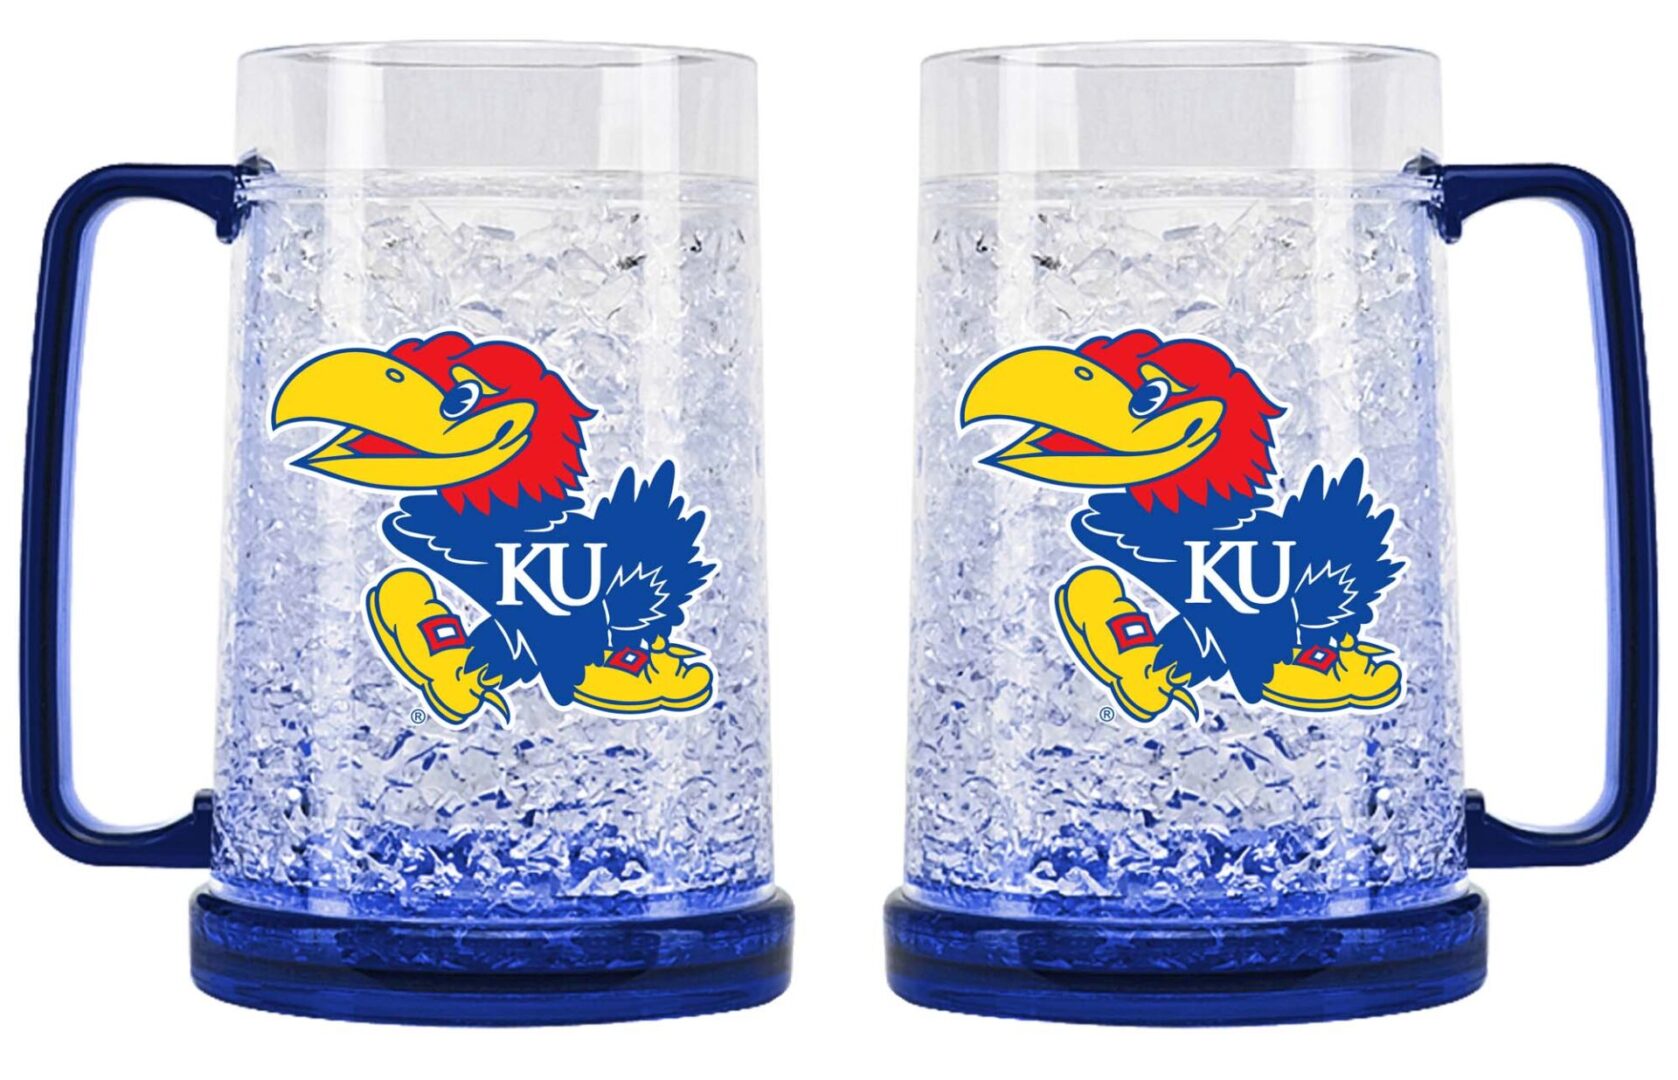 Two crystal cups with Jayhawks mascot and blue handles